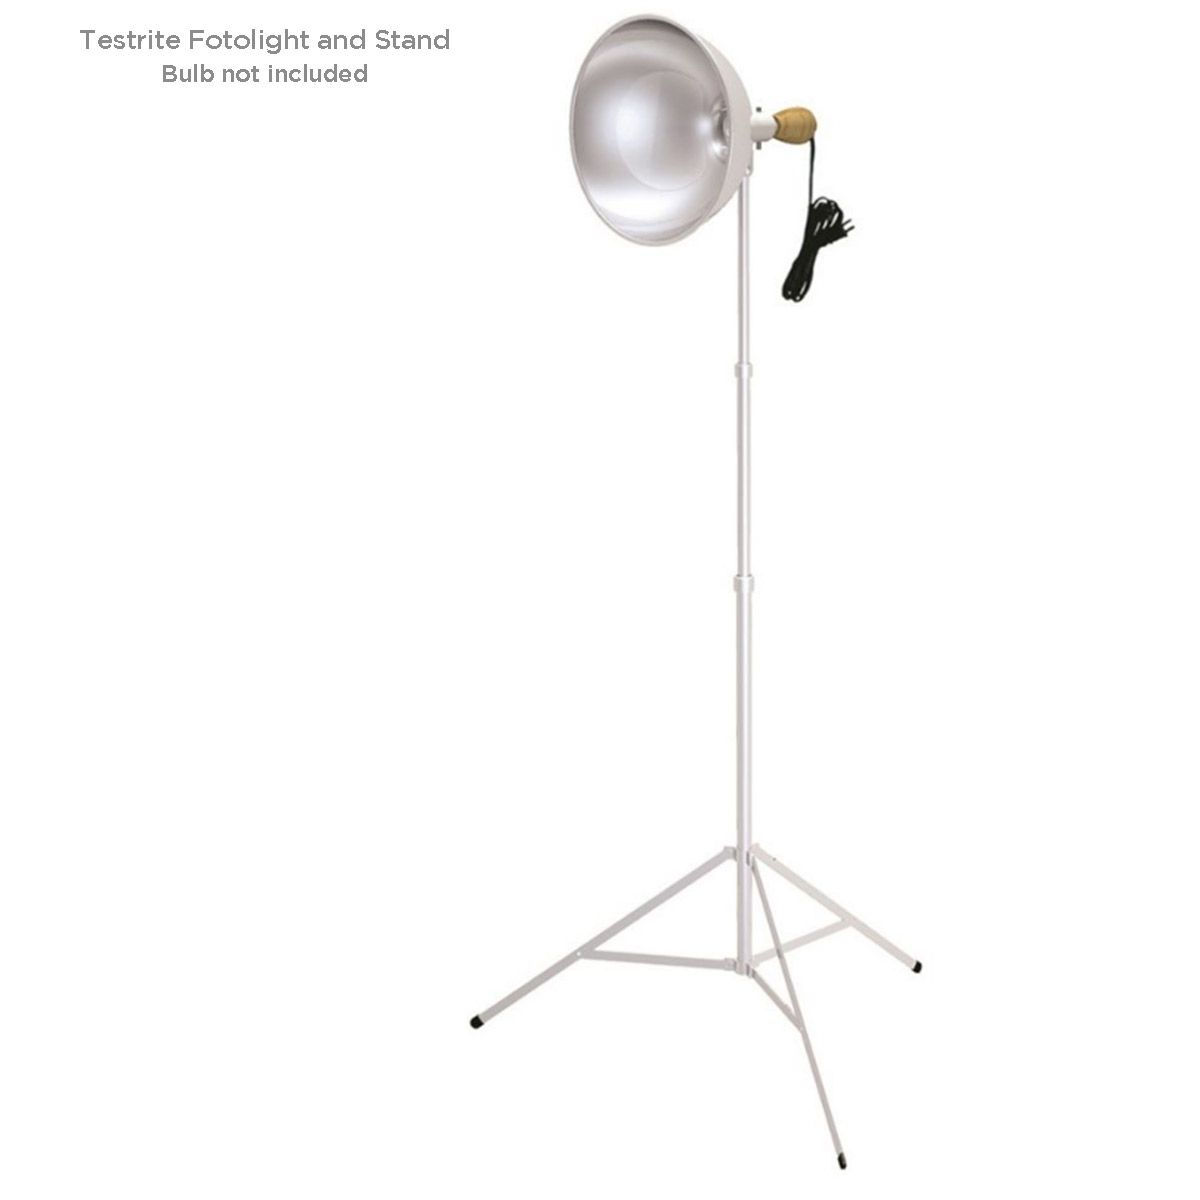 Testrite Fotolight And Stand